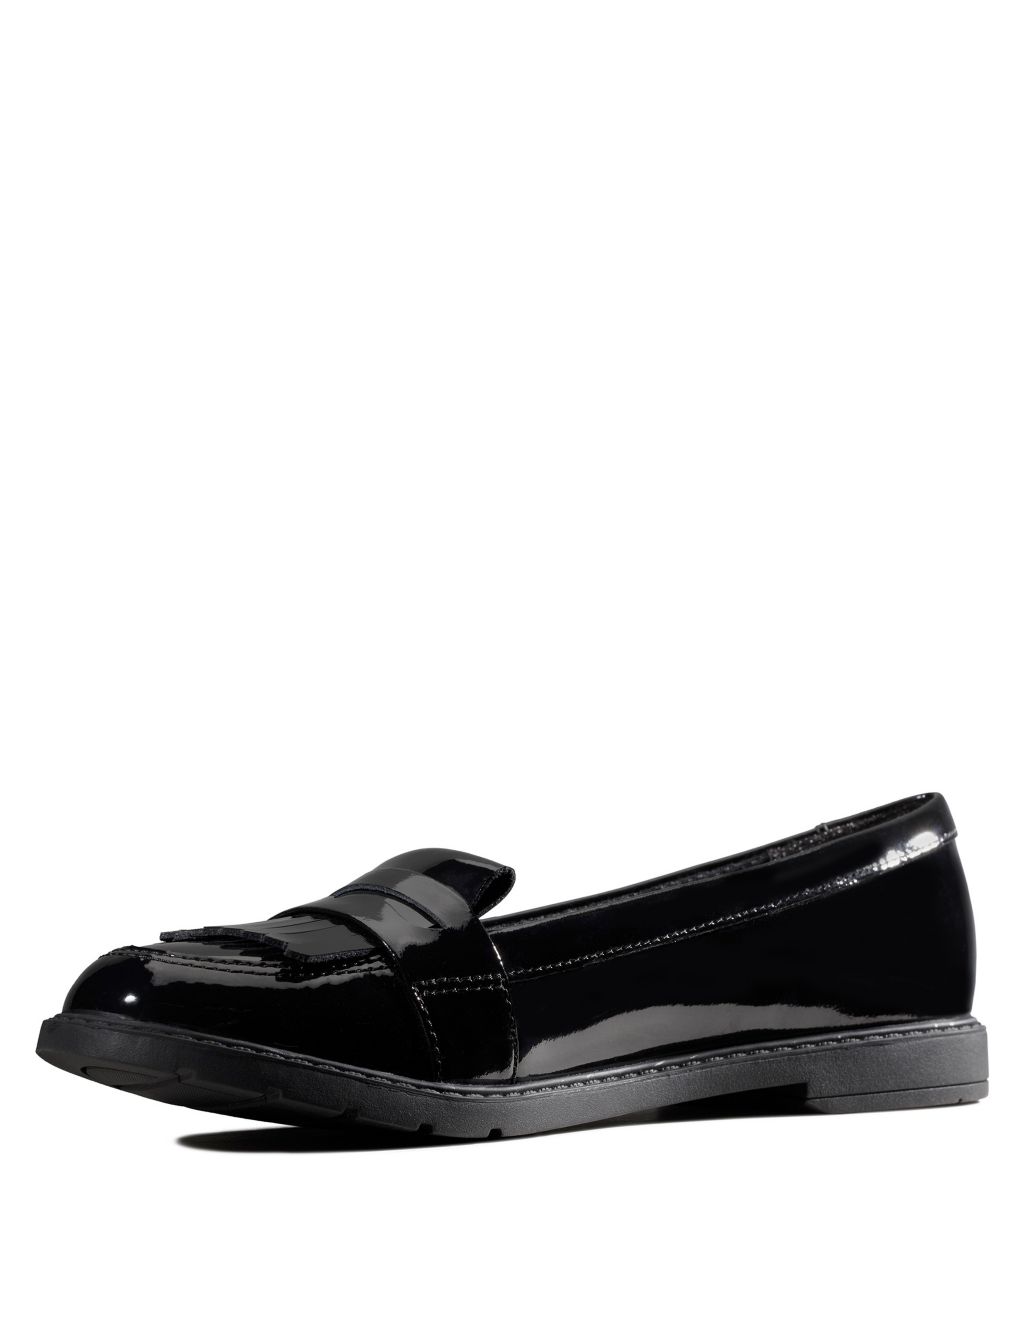 Kids' Leather Slip-on Loafers (Youth size 3-8) image 5